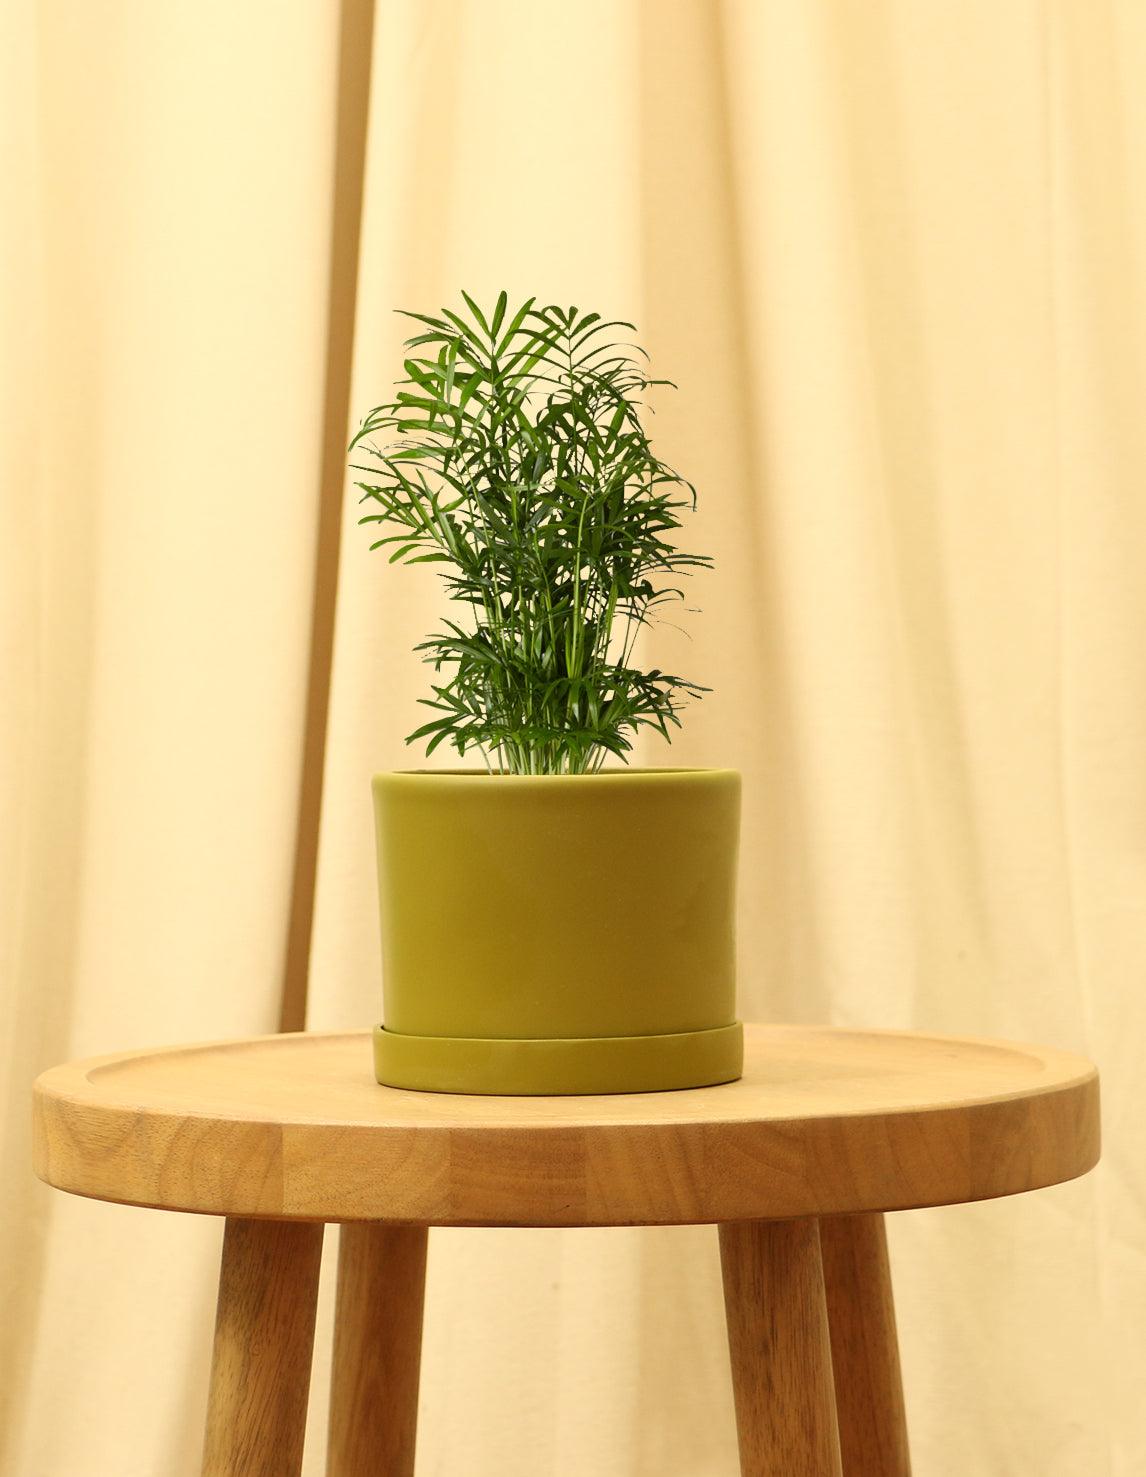 Small Parlor Palm in green pot.